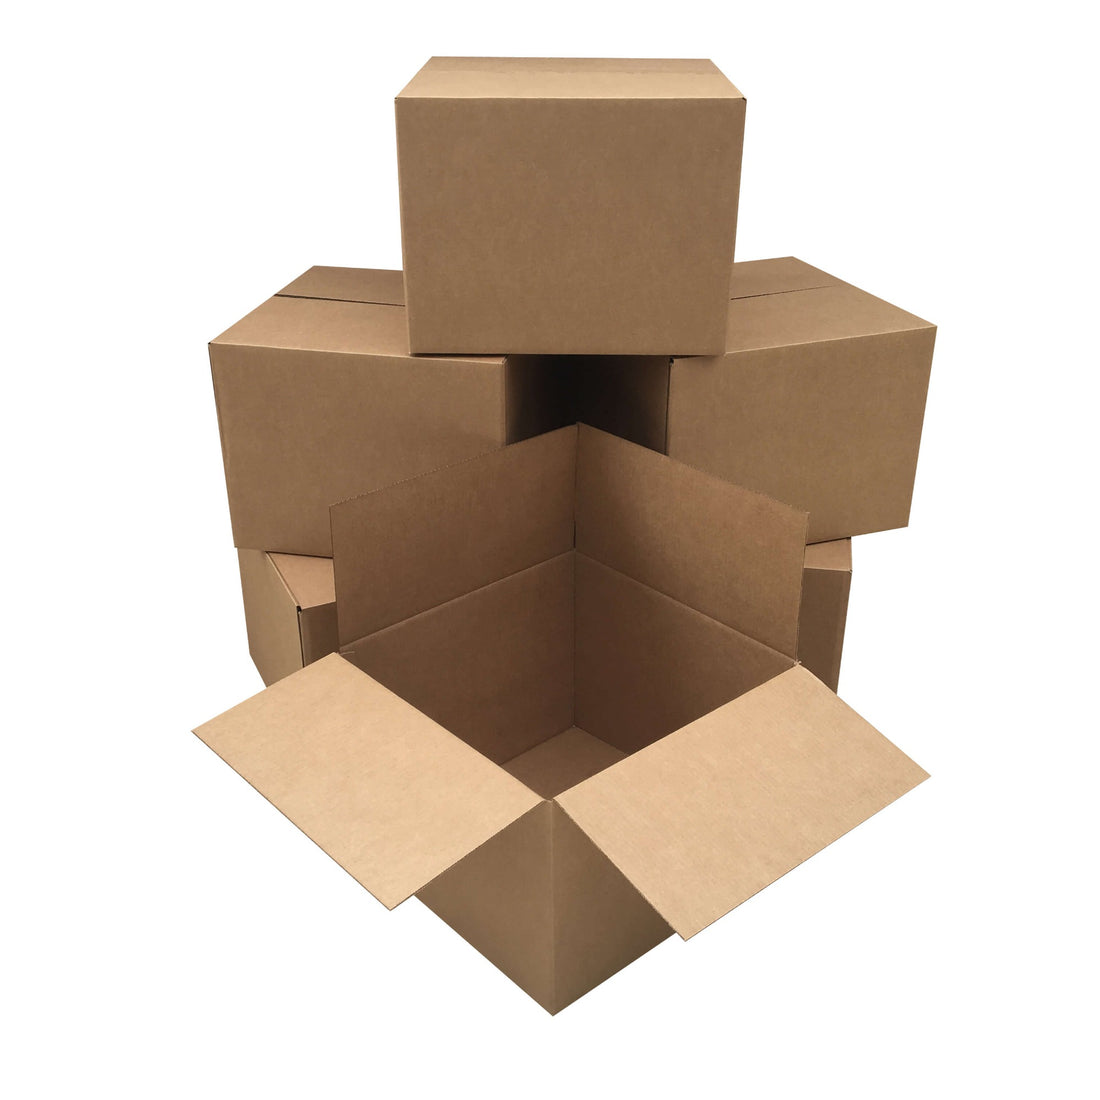 Boxes for moving house